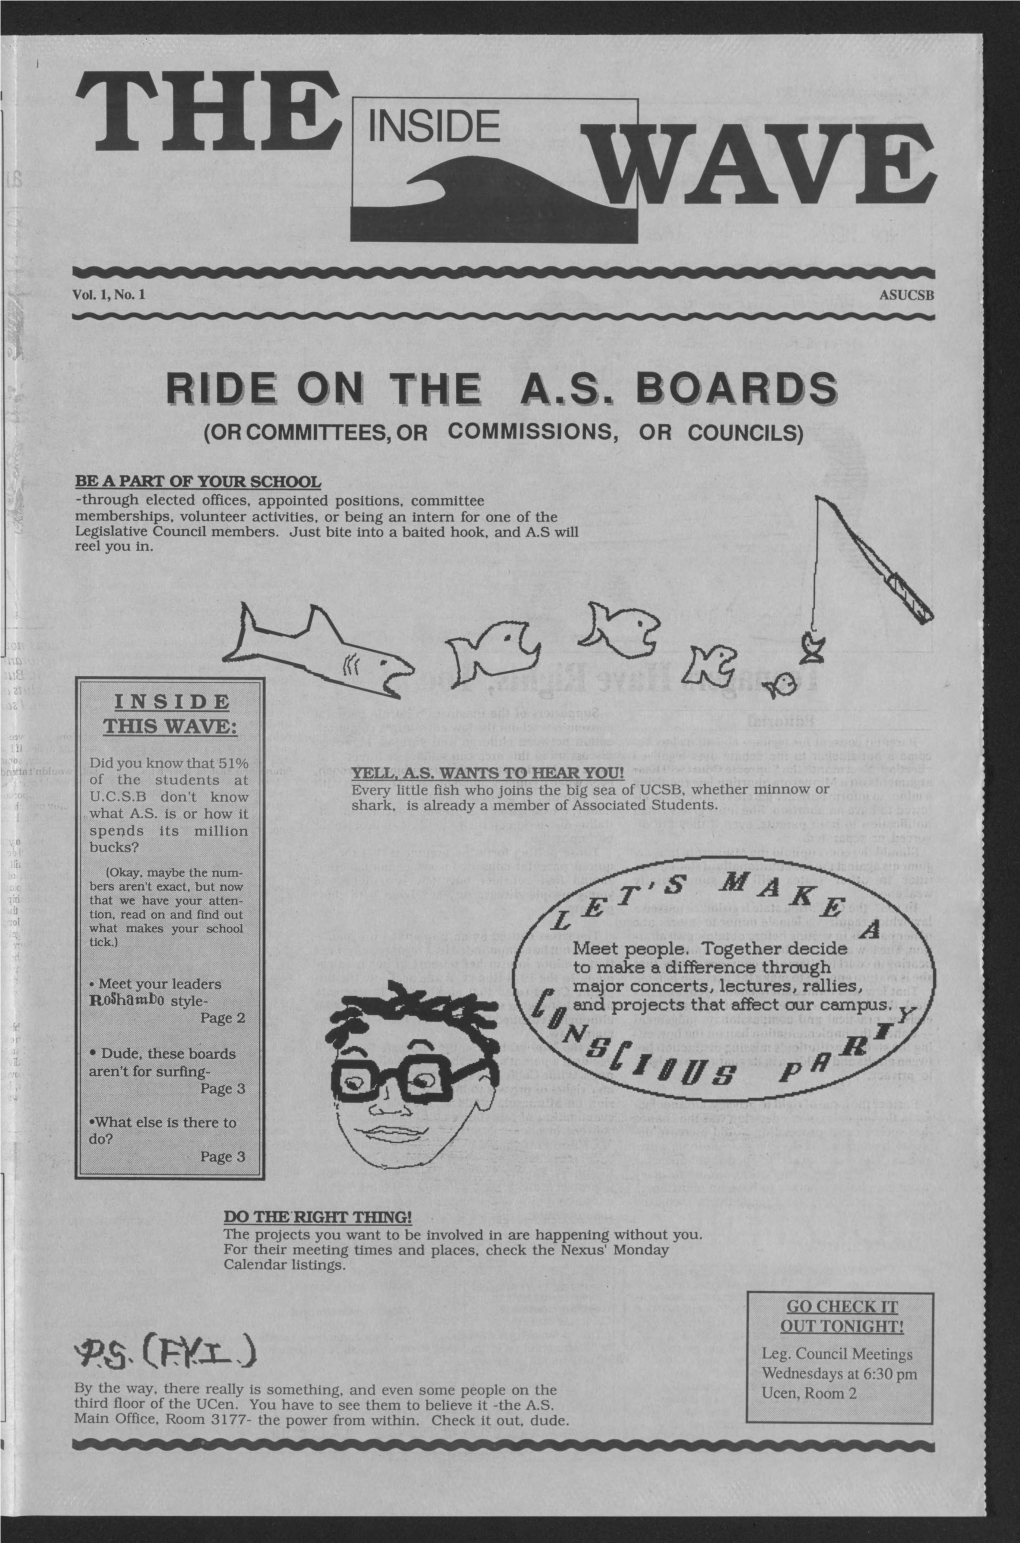 Ride on the As Boards